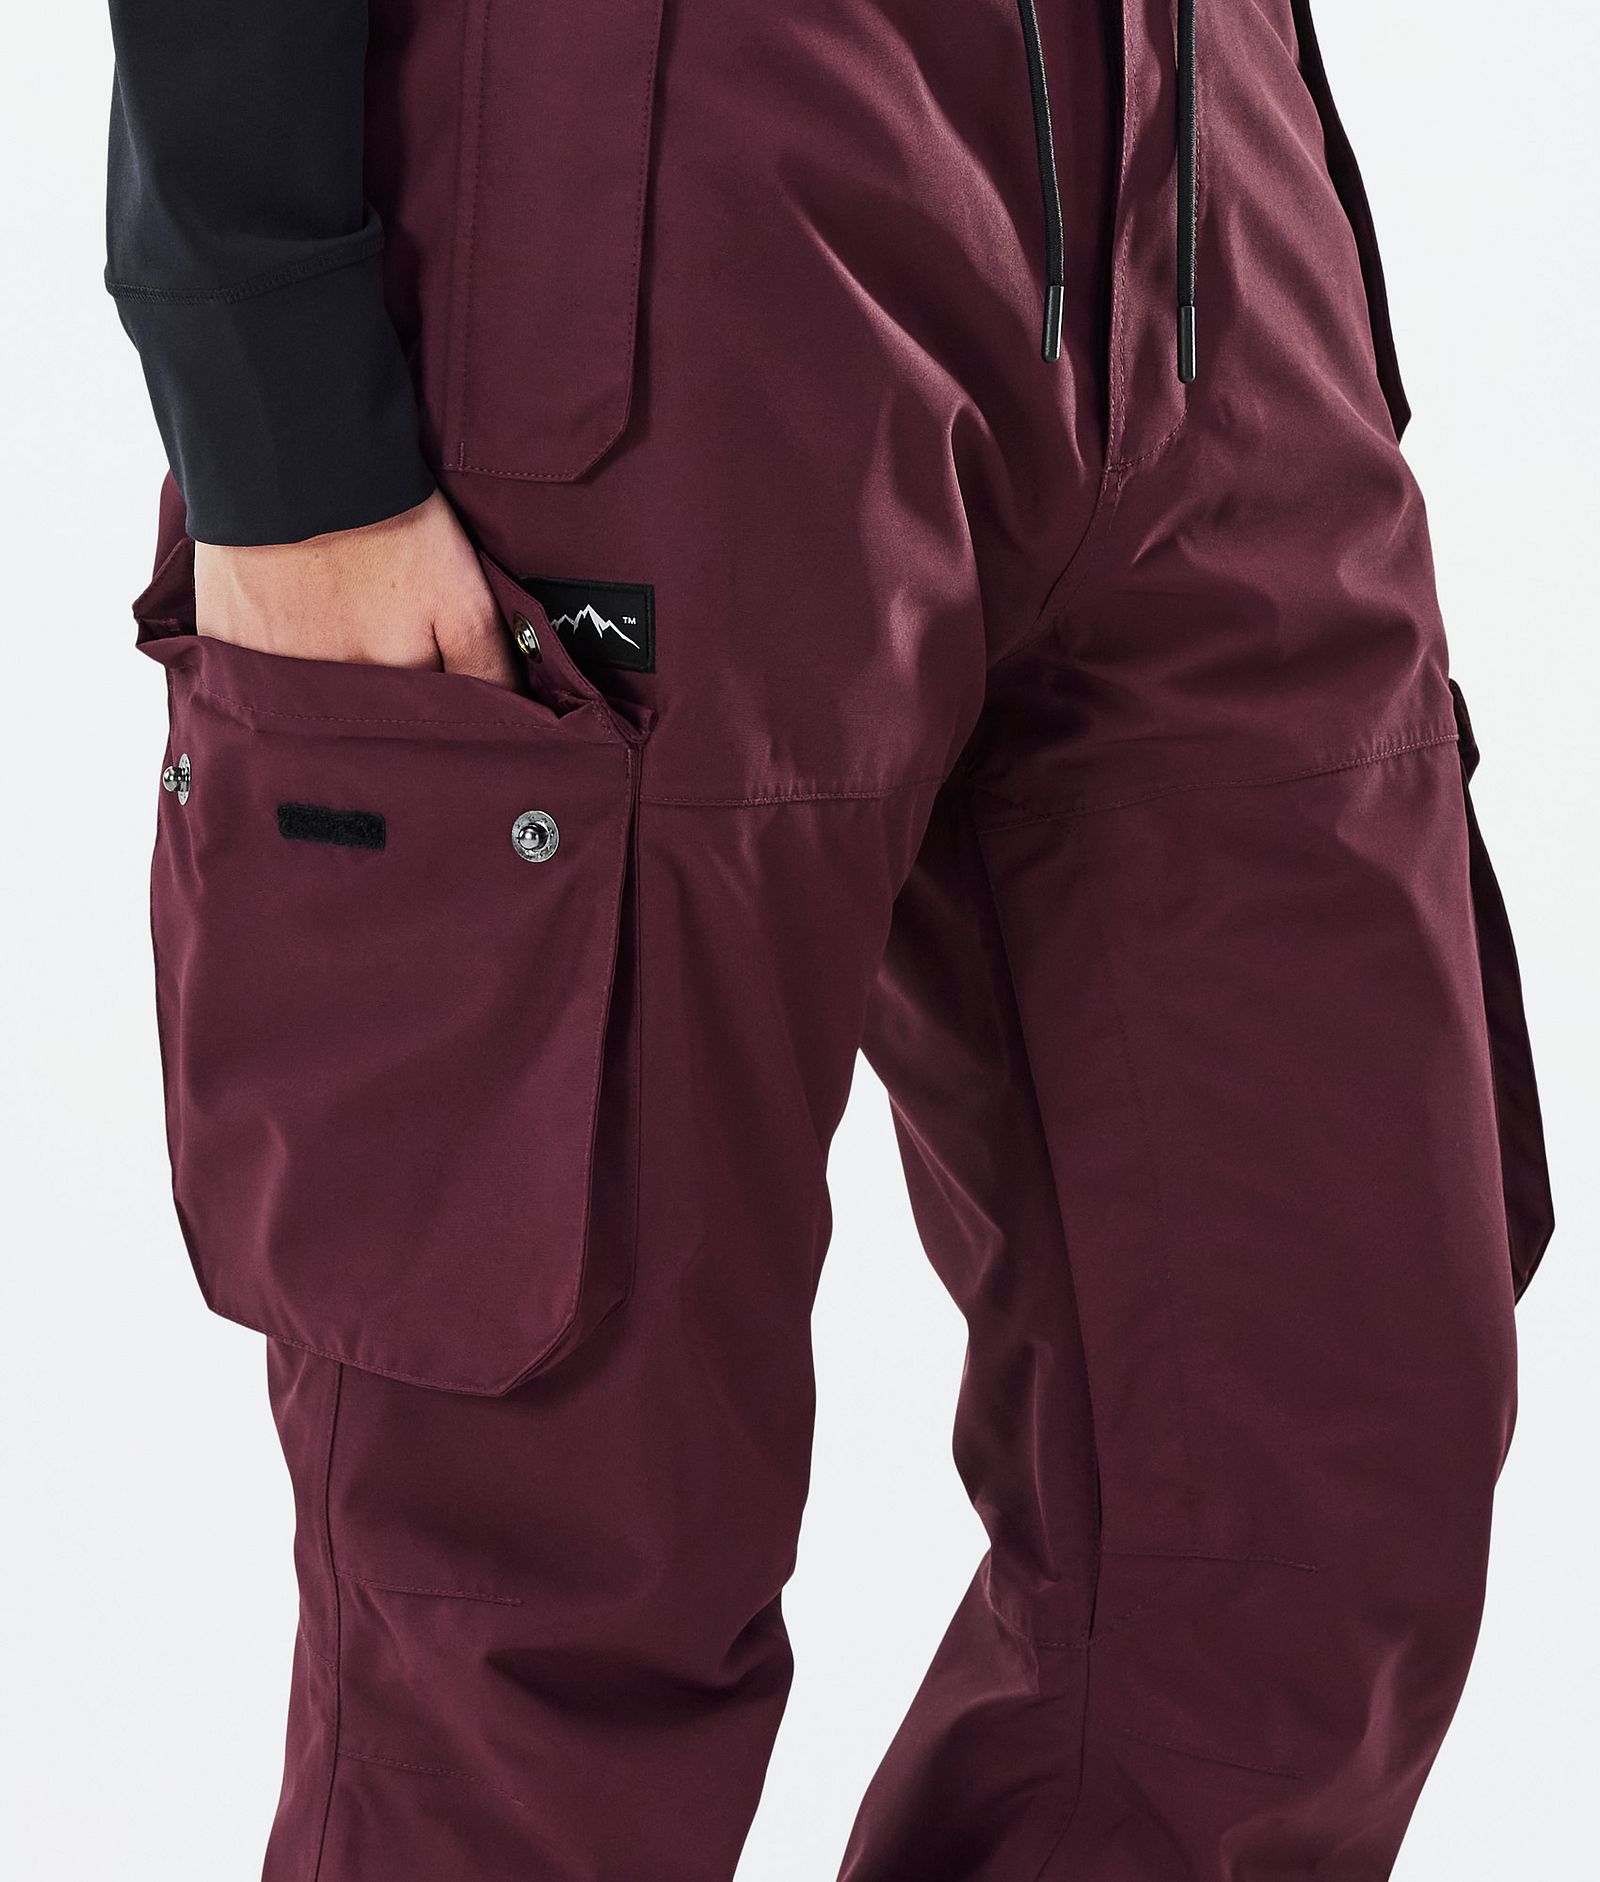 Dope Iconic W Pantalones Esquí Mujer Don Burgundy